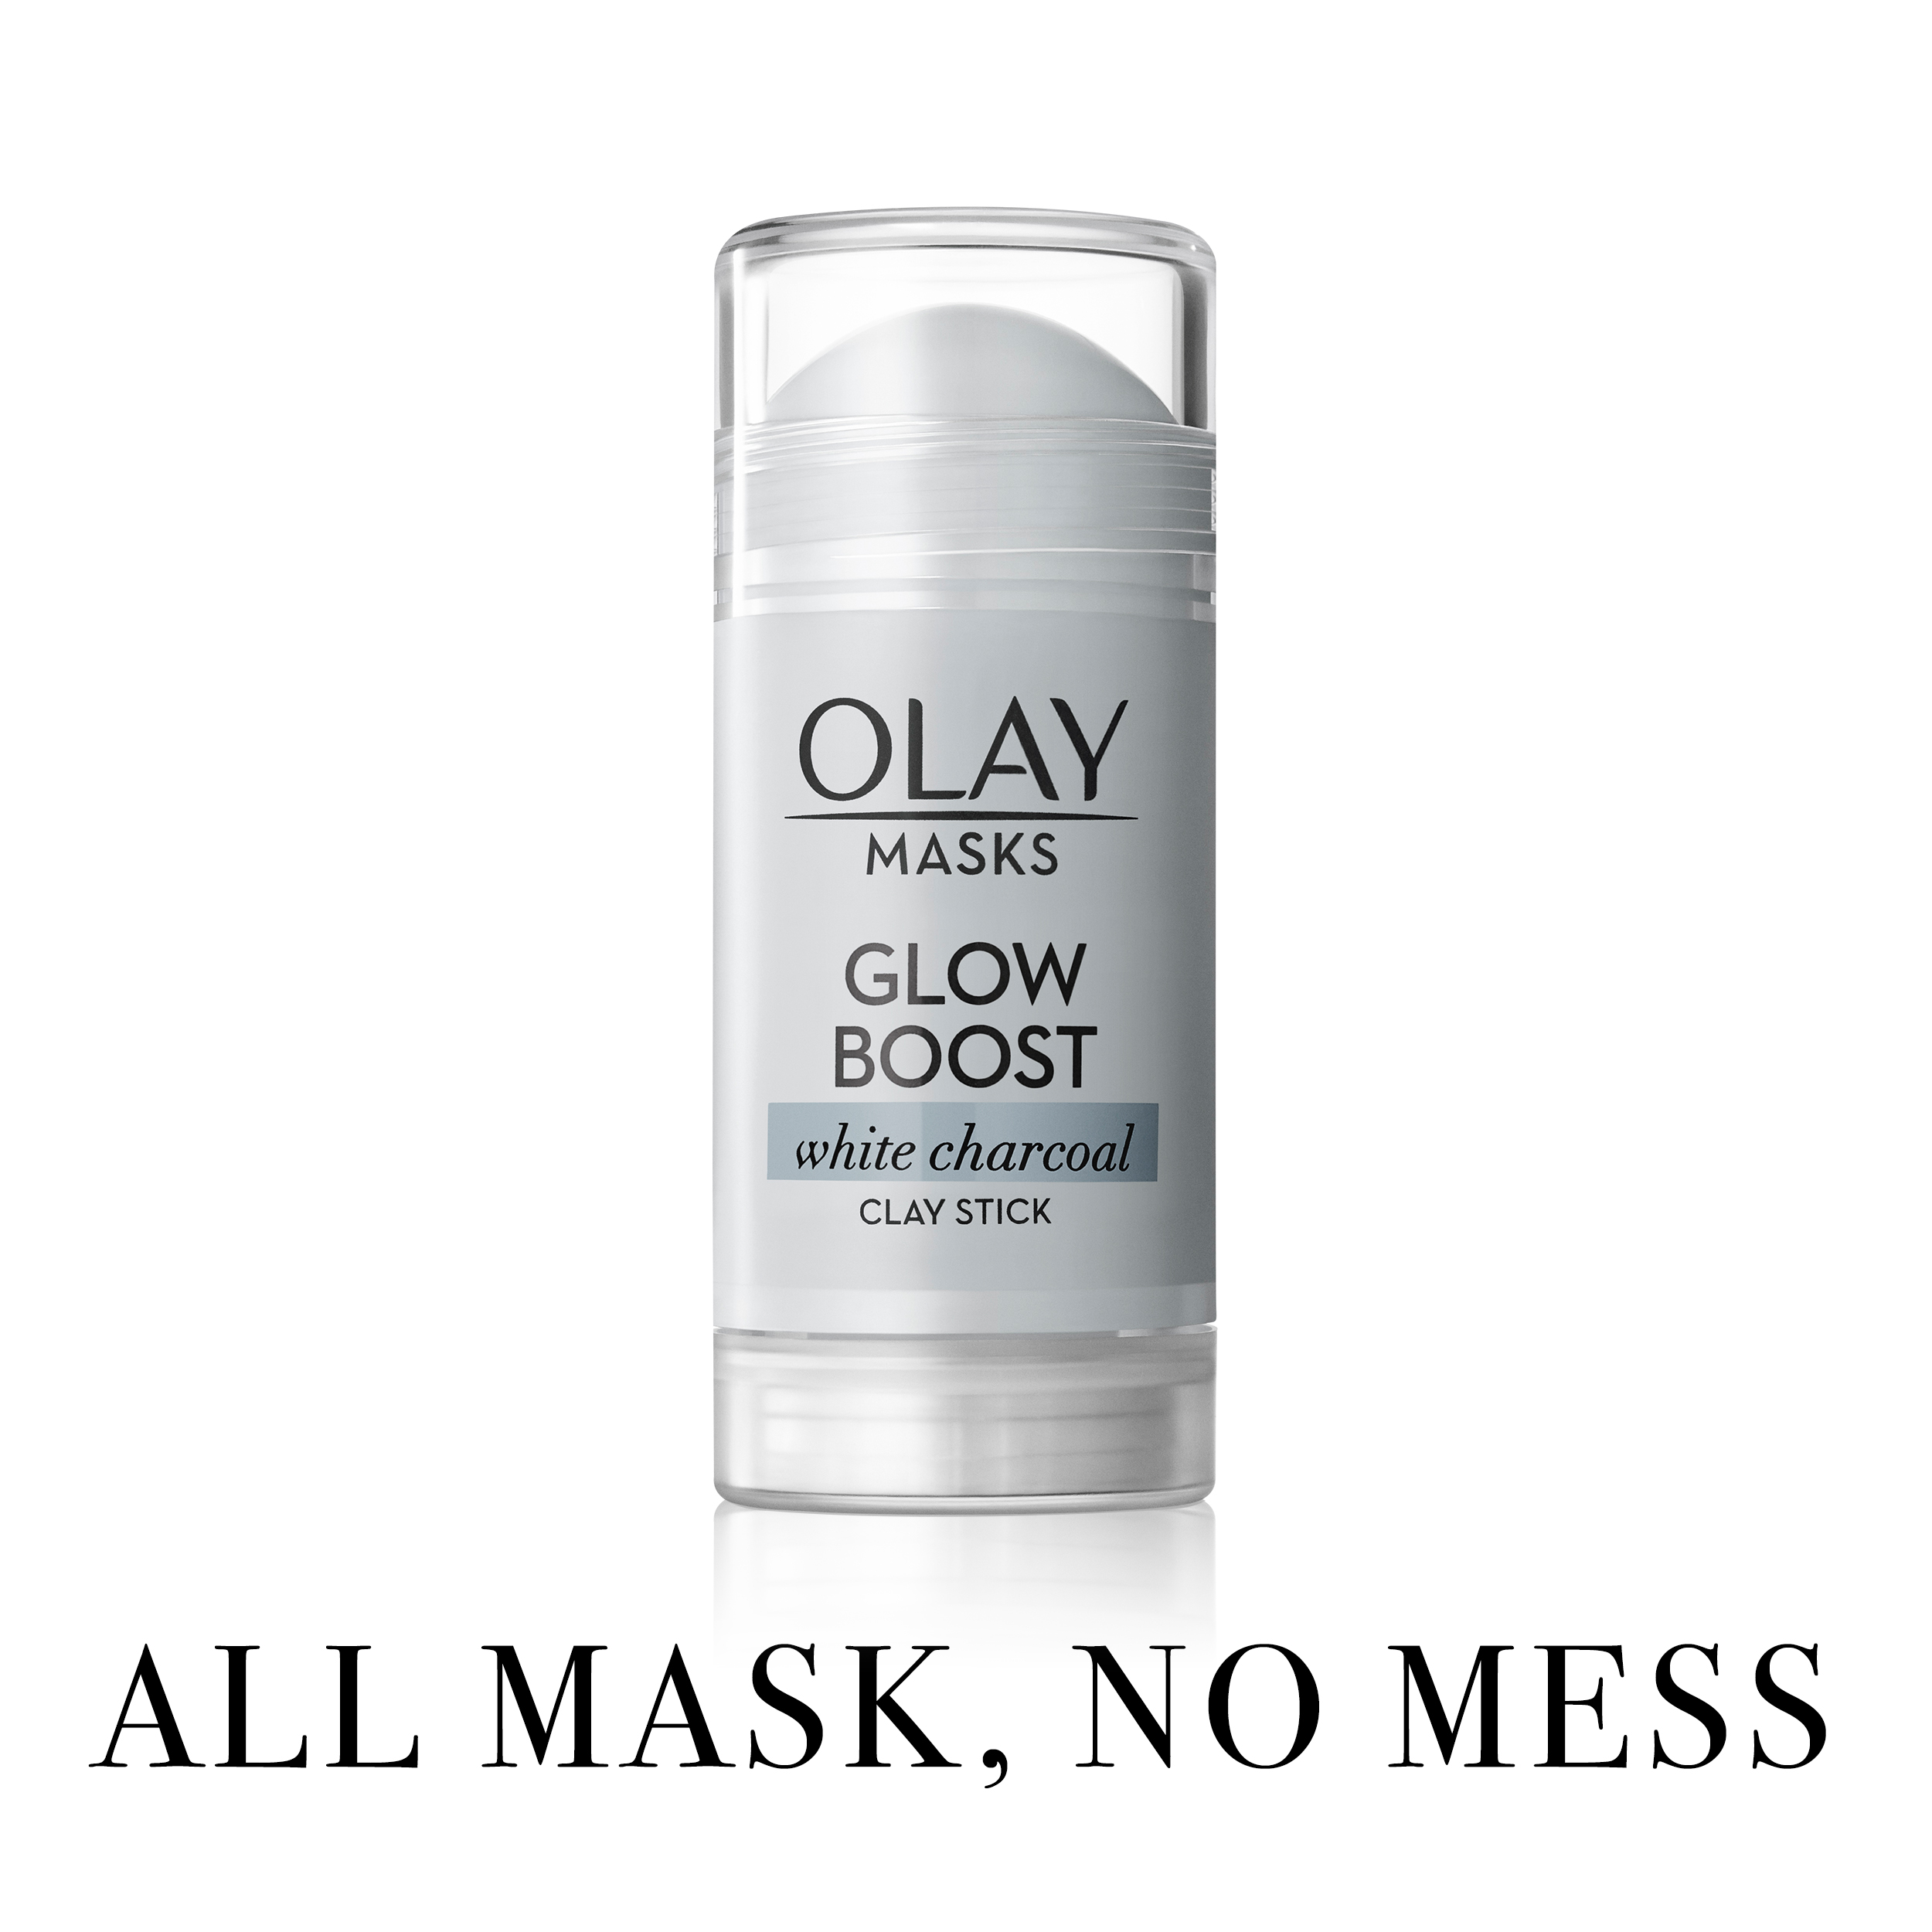 Olay Face Mask Stick, Glow Boost with White Charcoal Clay, 1.7 oz - image 6 of 9